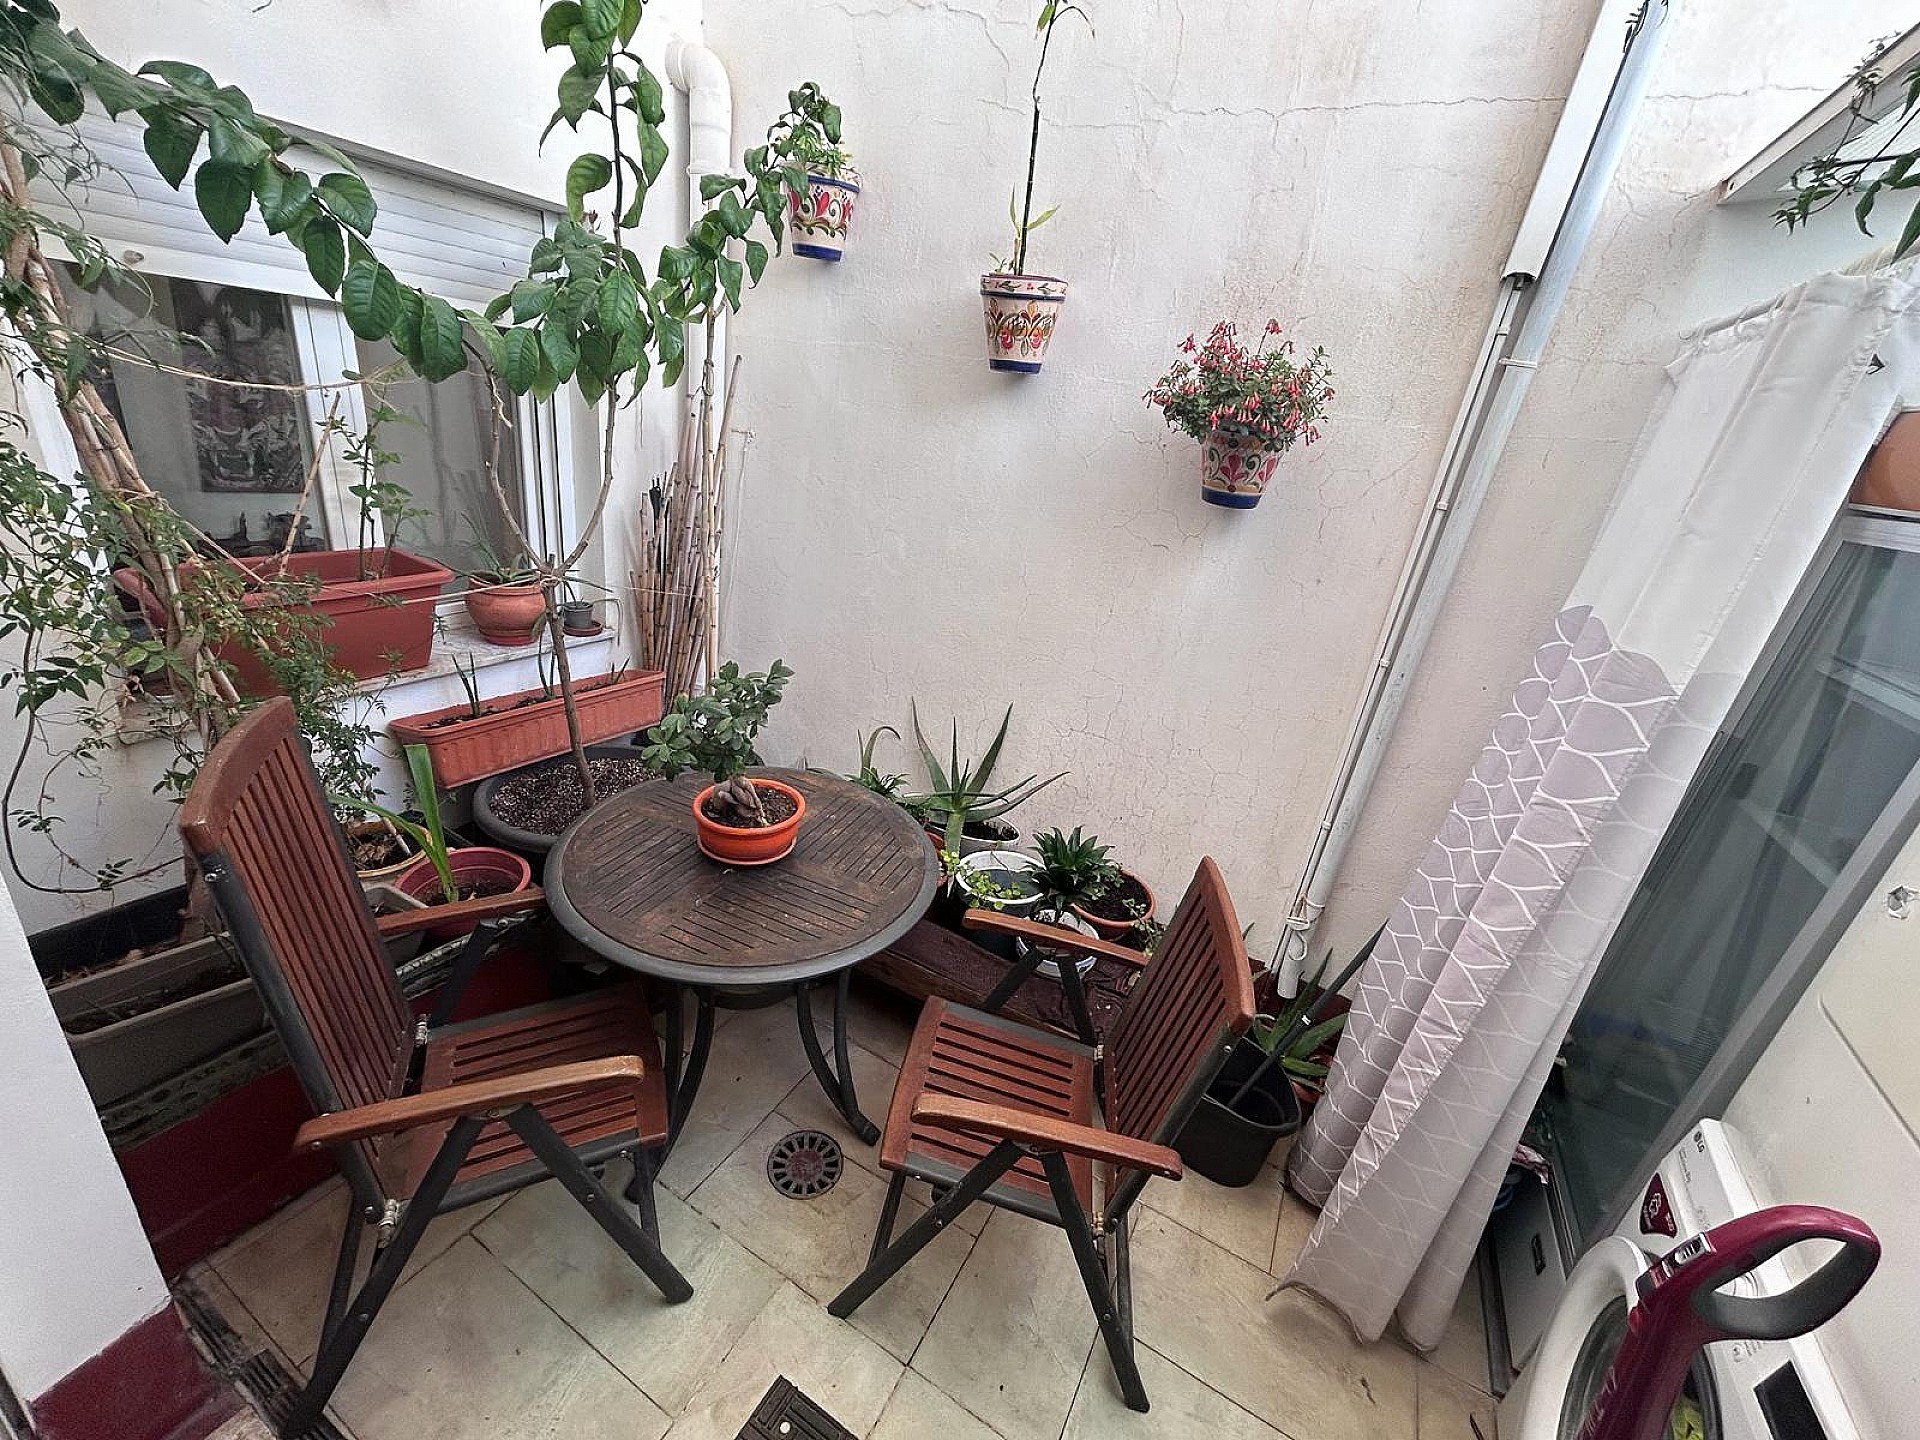 Townhouse for sale in Alicante 3